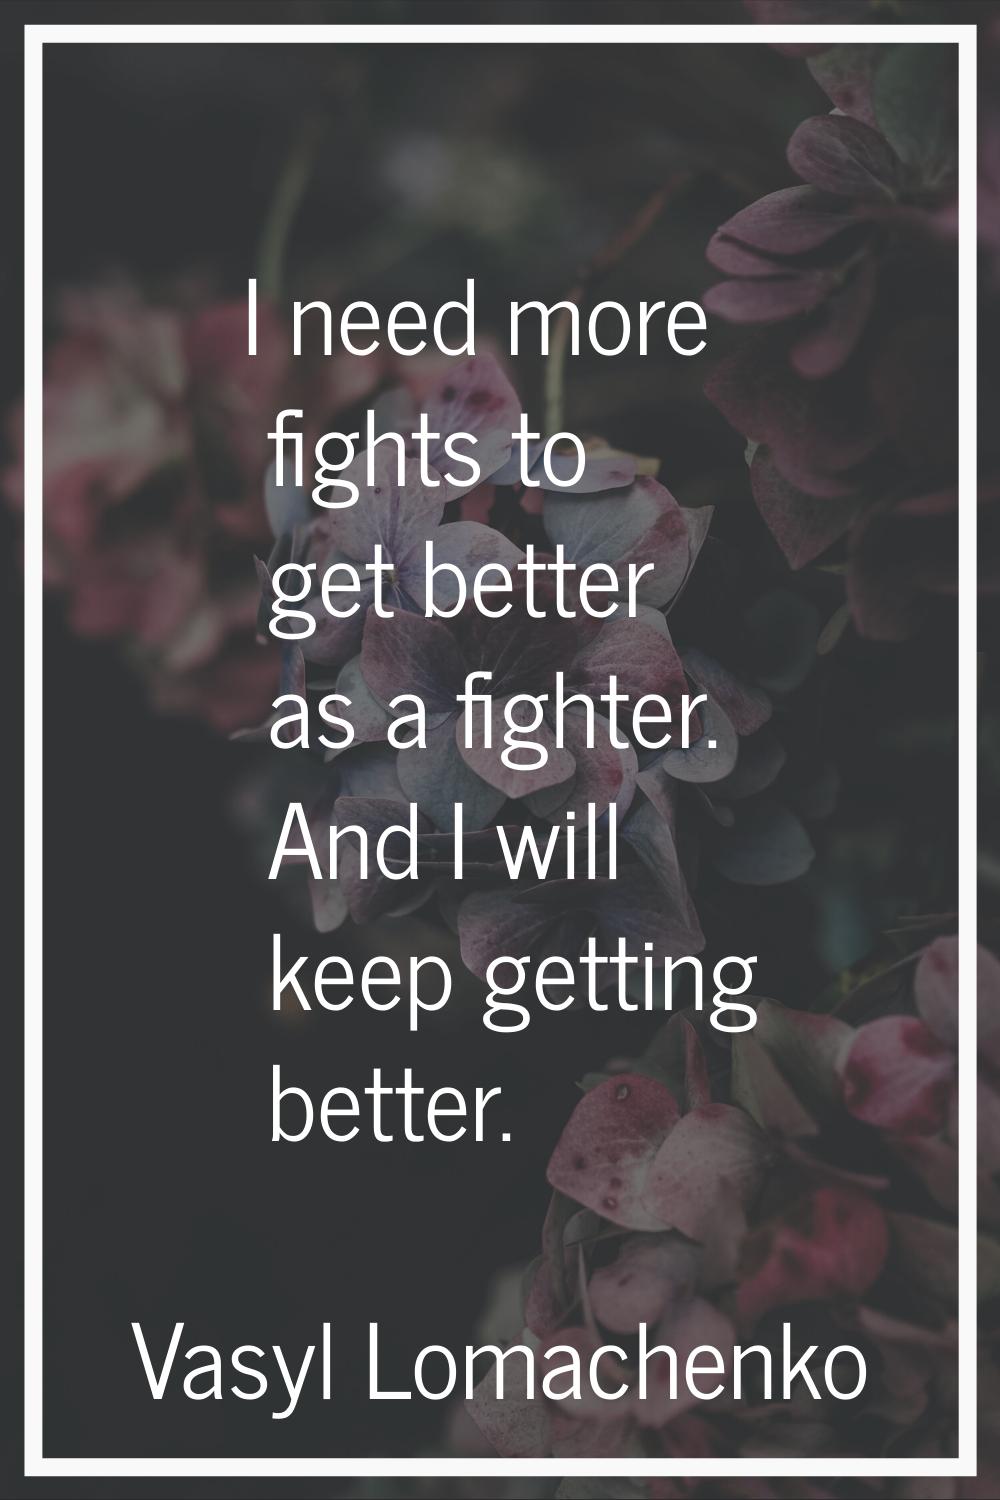 I need more fights to get better as a fighter. And I will keep getting better.